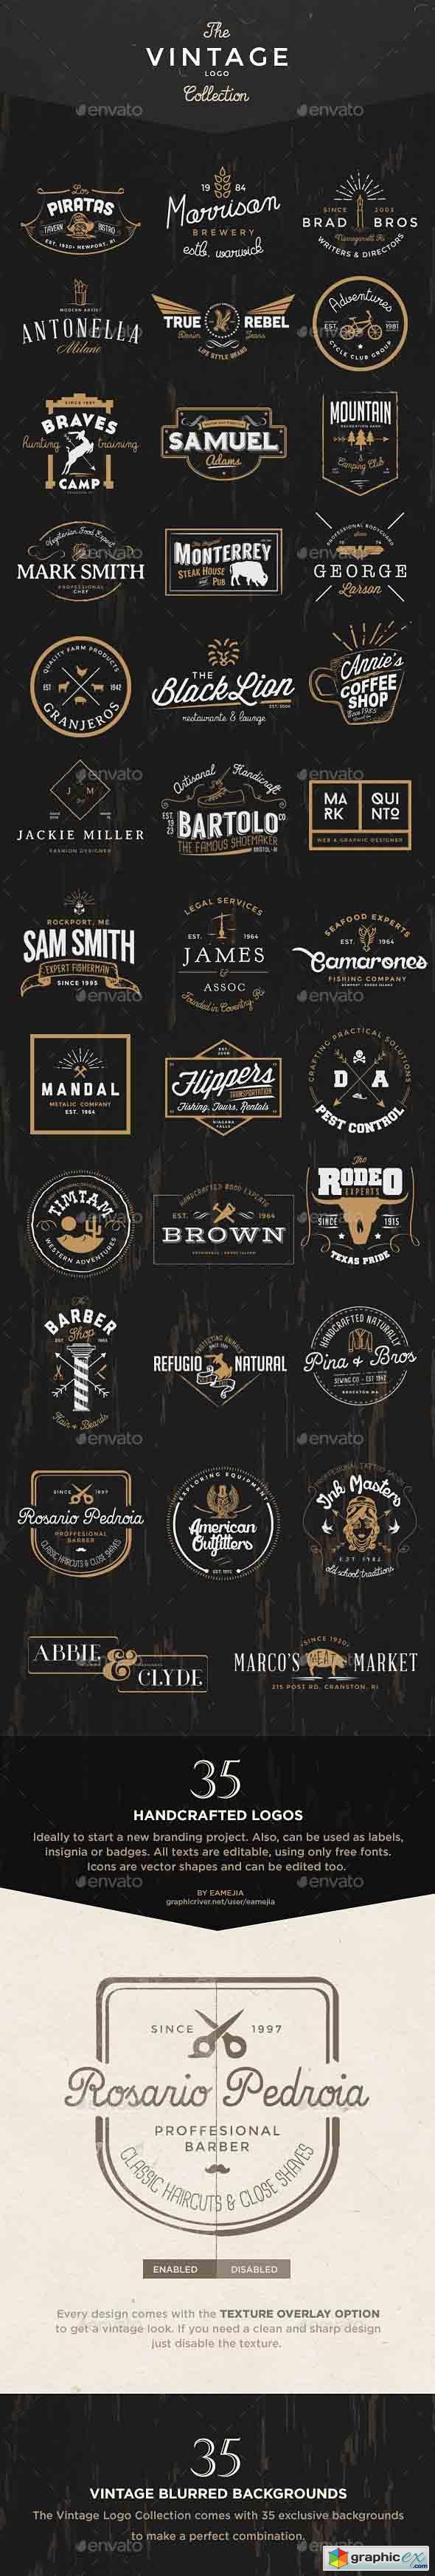 The Vintage Logo & Badge Collection - Graphicriver 9244871